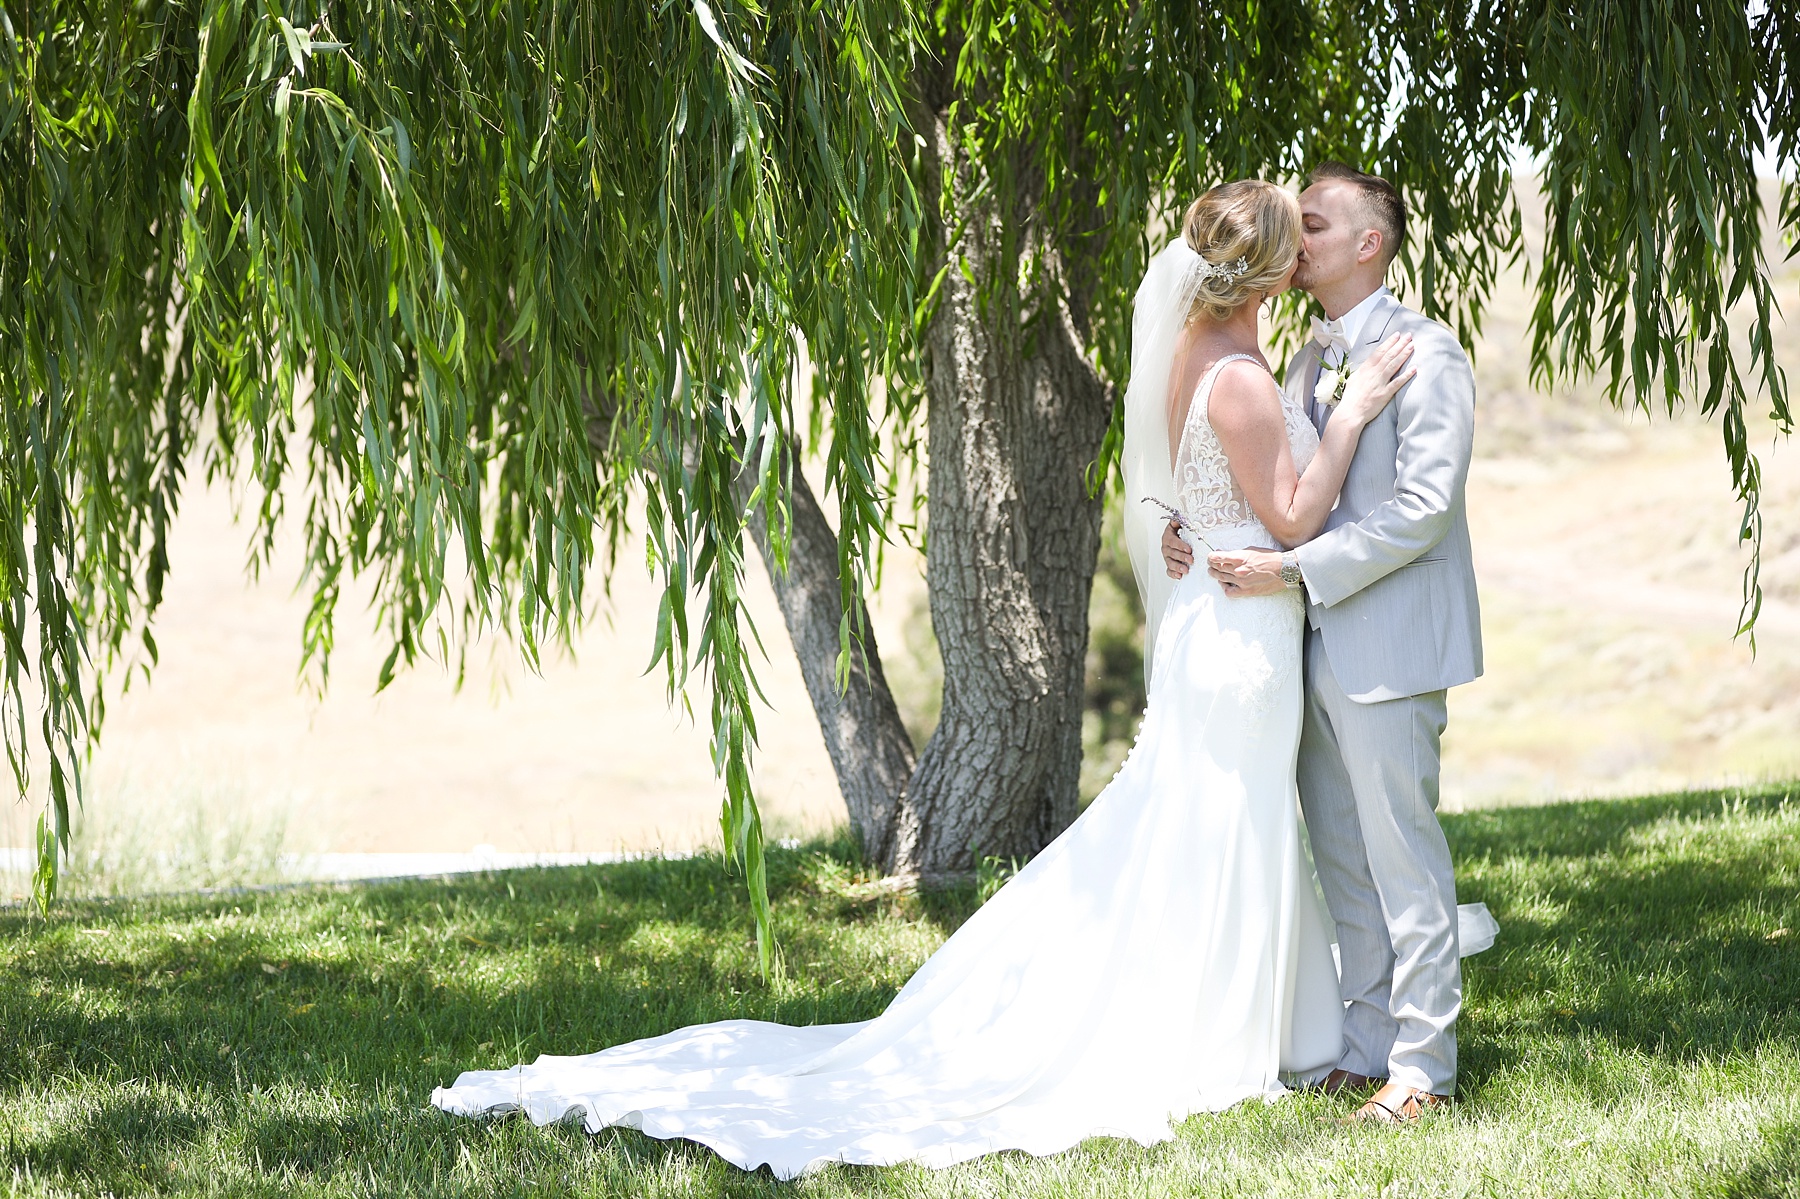 bride with veil kisses groom under willow tree